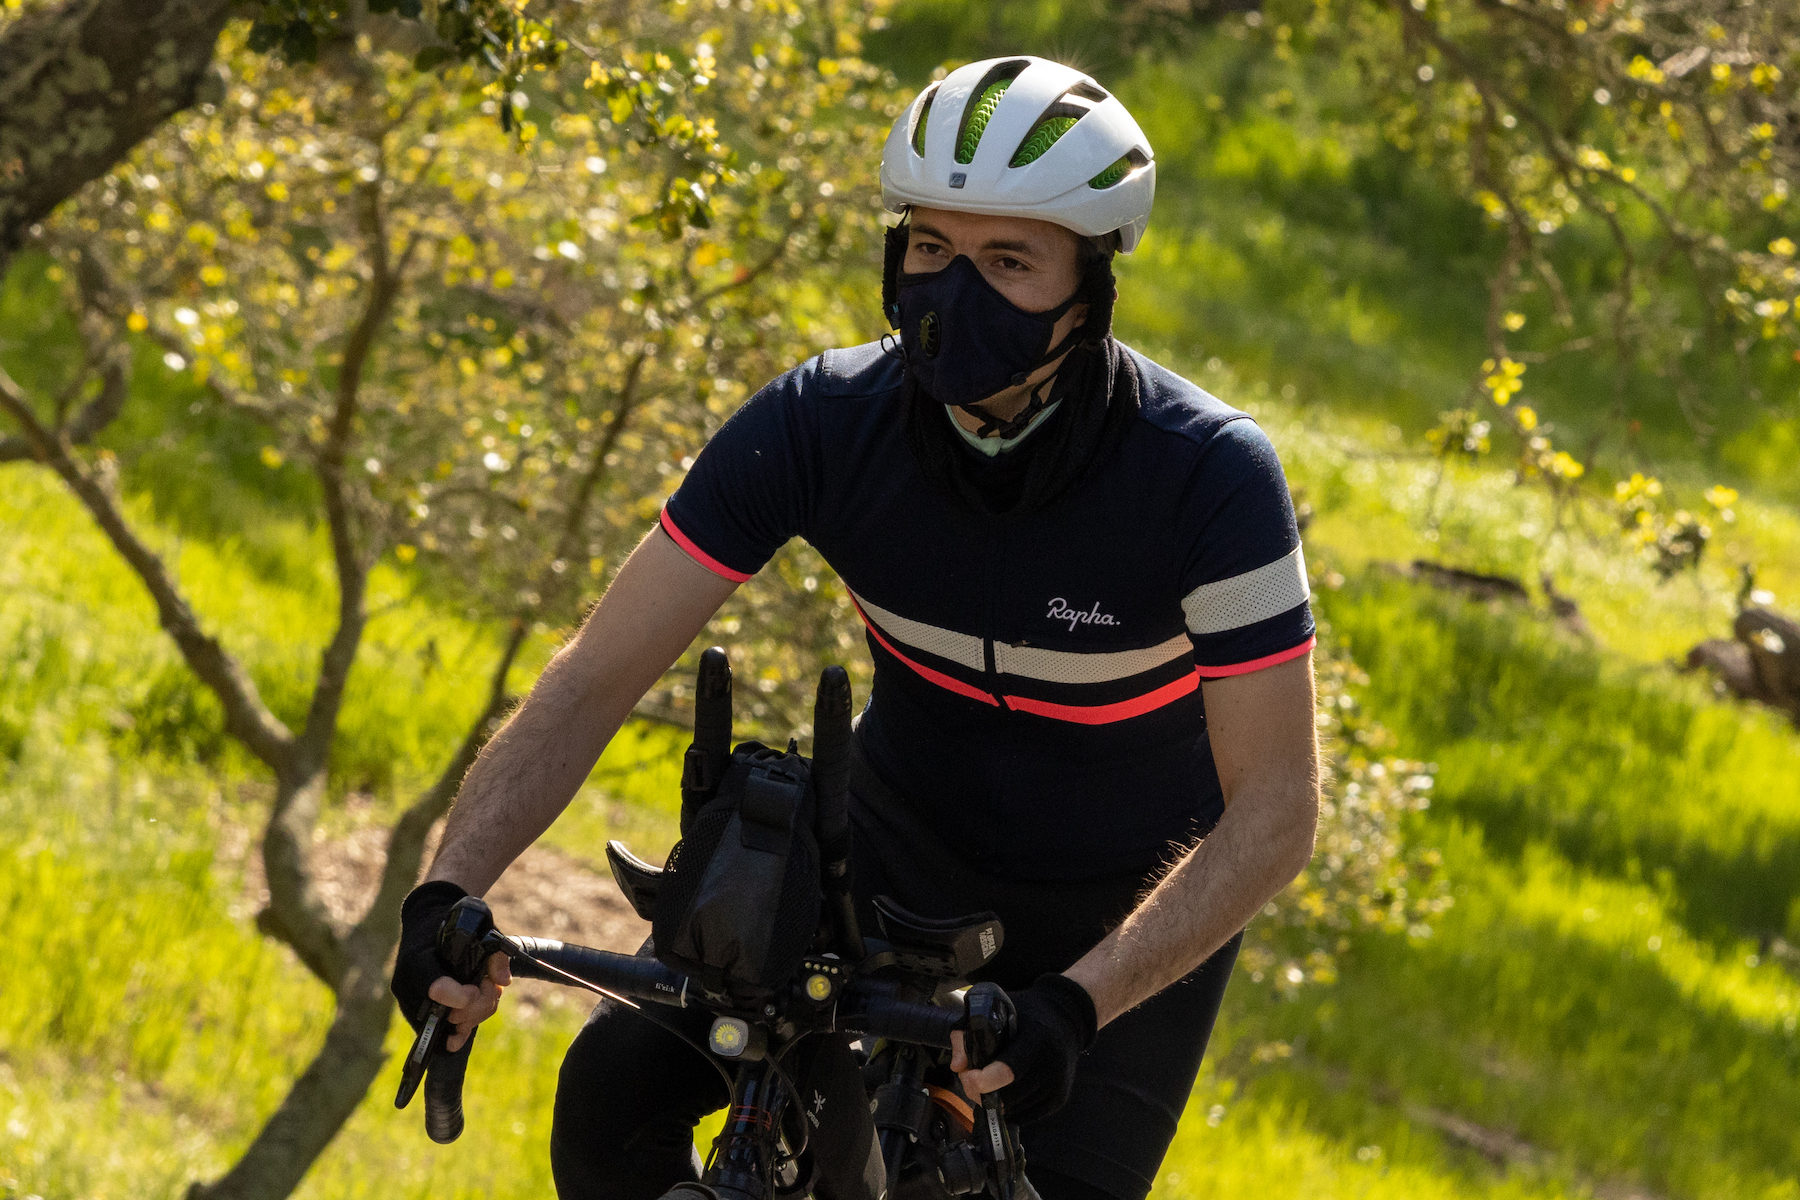 A cyclist wearing a helmet and mask steps out of the seat to climb a hill, with green trees in the background.